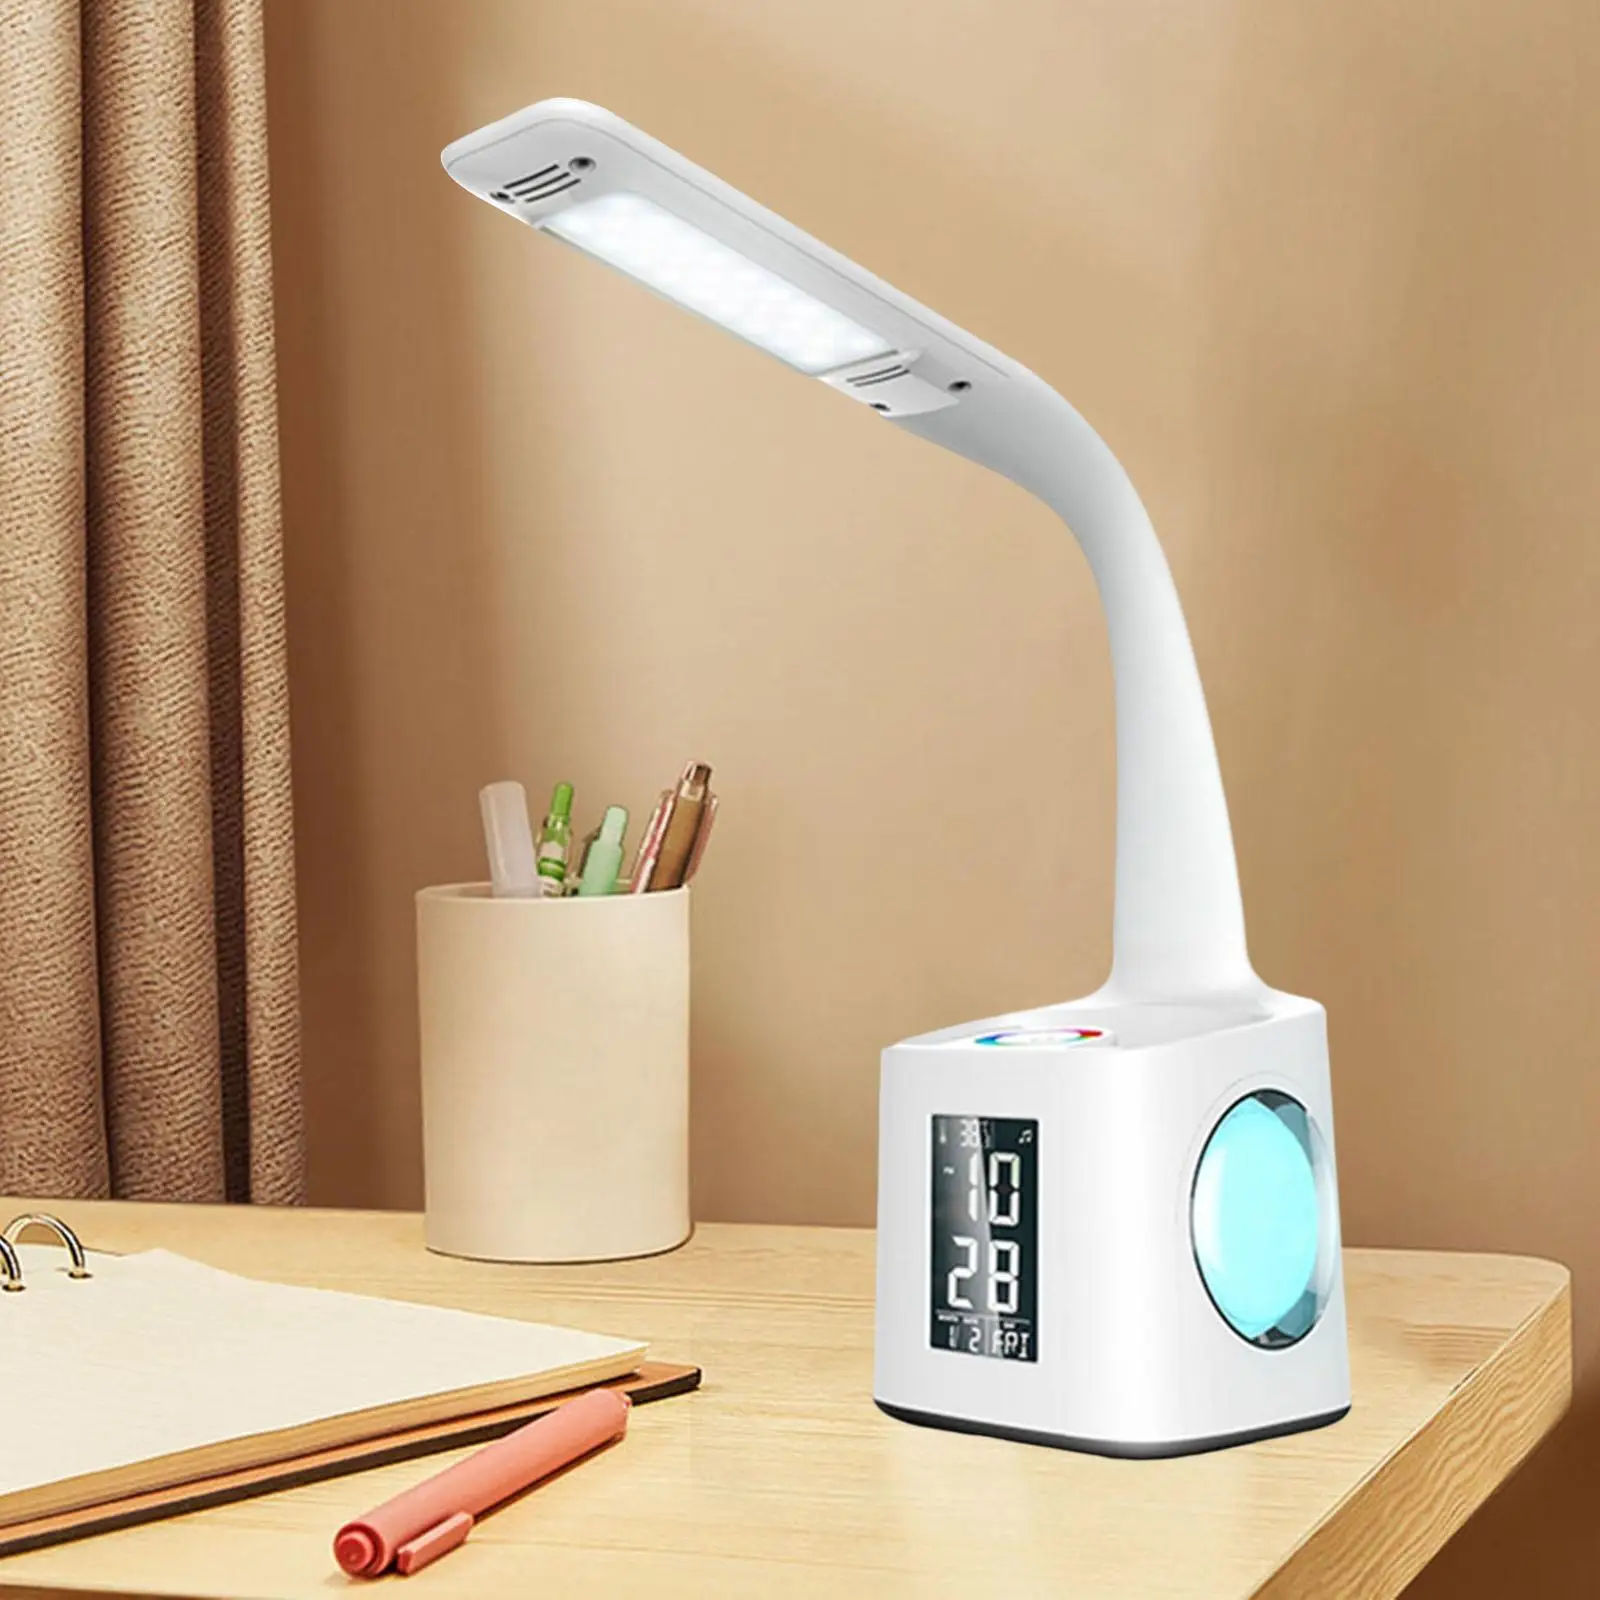 Table Lamp Pen Holder 3 Level Dimmer Calendar Alarm Temperature Decorative Display Time Date Atmosphere Light for Office Home